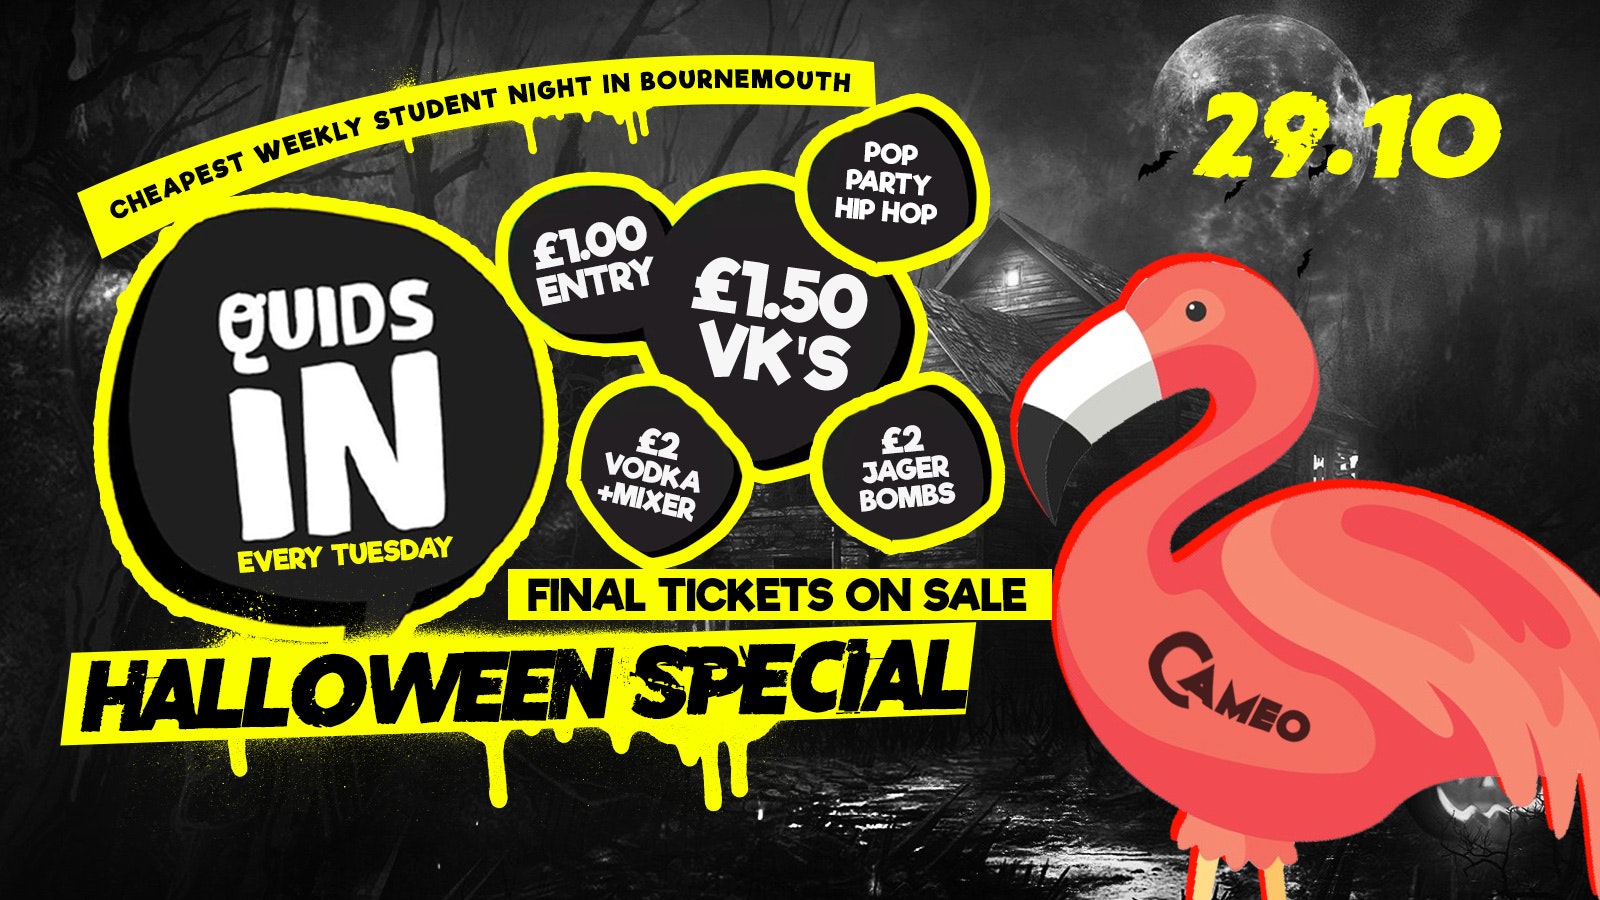 FREE PARTY £1.50 DRINKS – Quids In Spooky Halloween Special – // 29.10 // Cameo Every Tuesday